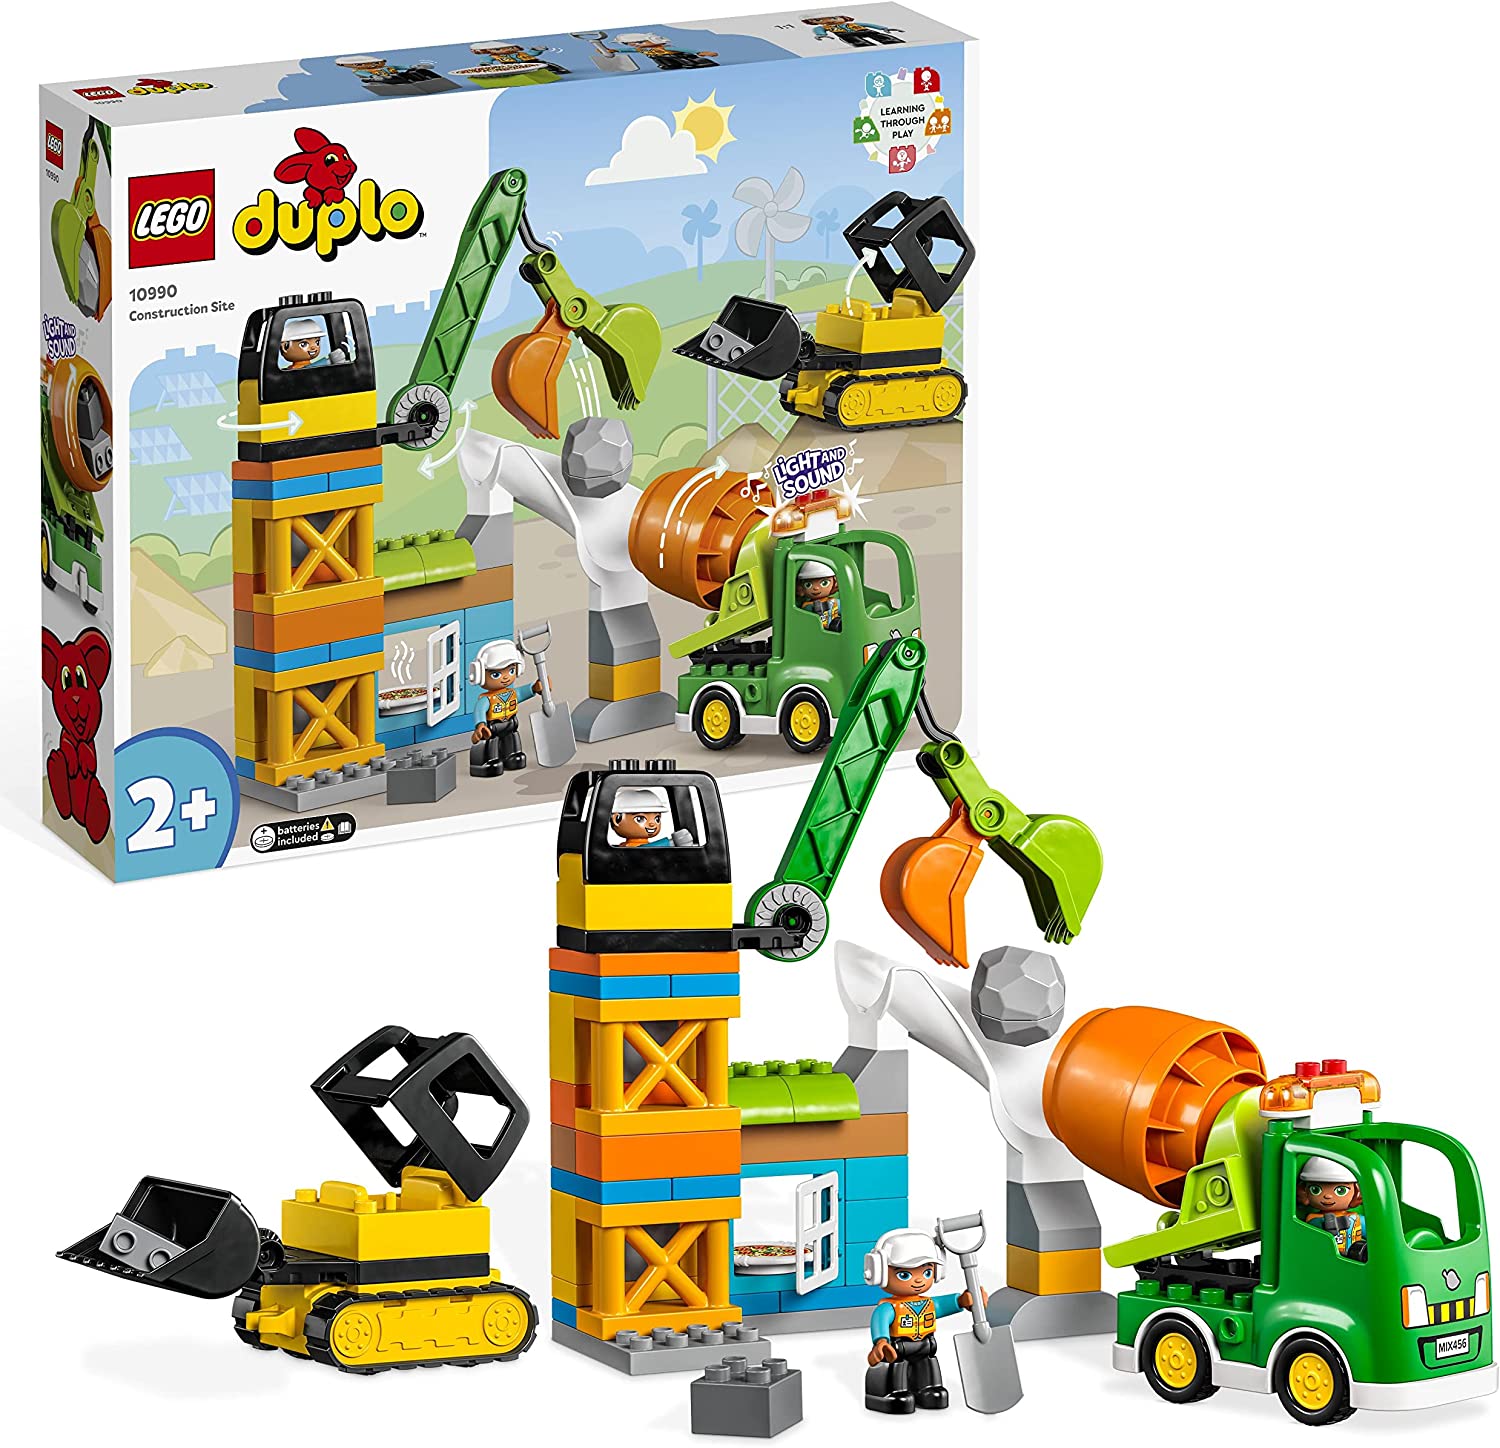 LEGO 10990 DUPLO Construction Site with Construction Vehicles, Crane, Bulldozer and Concrete Mixer Toy for 2 Year Old Boys and Girls with Large Blocks